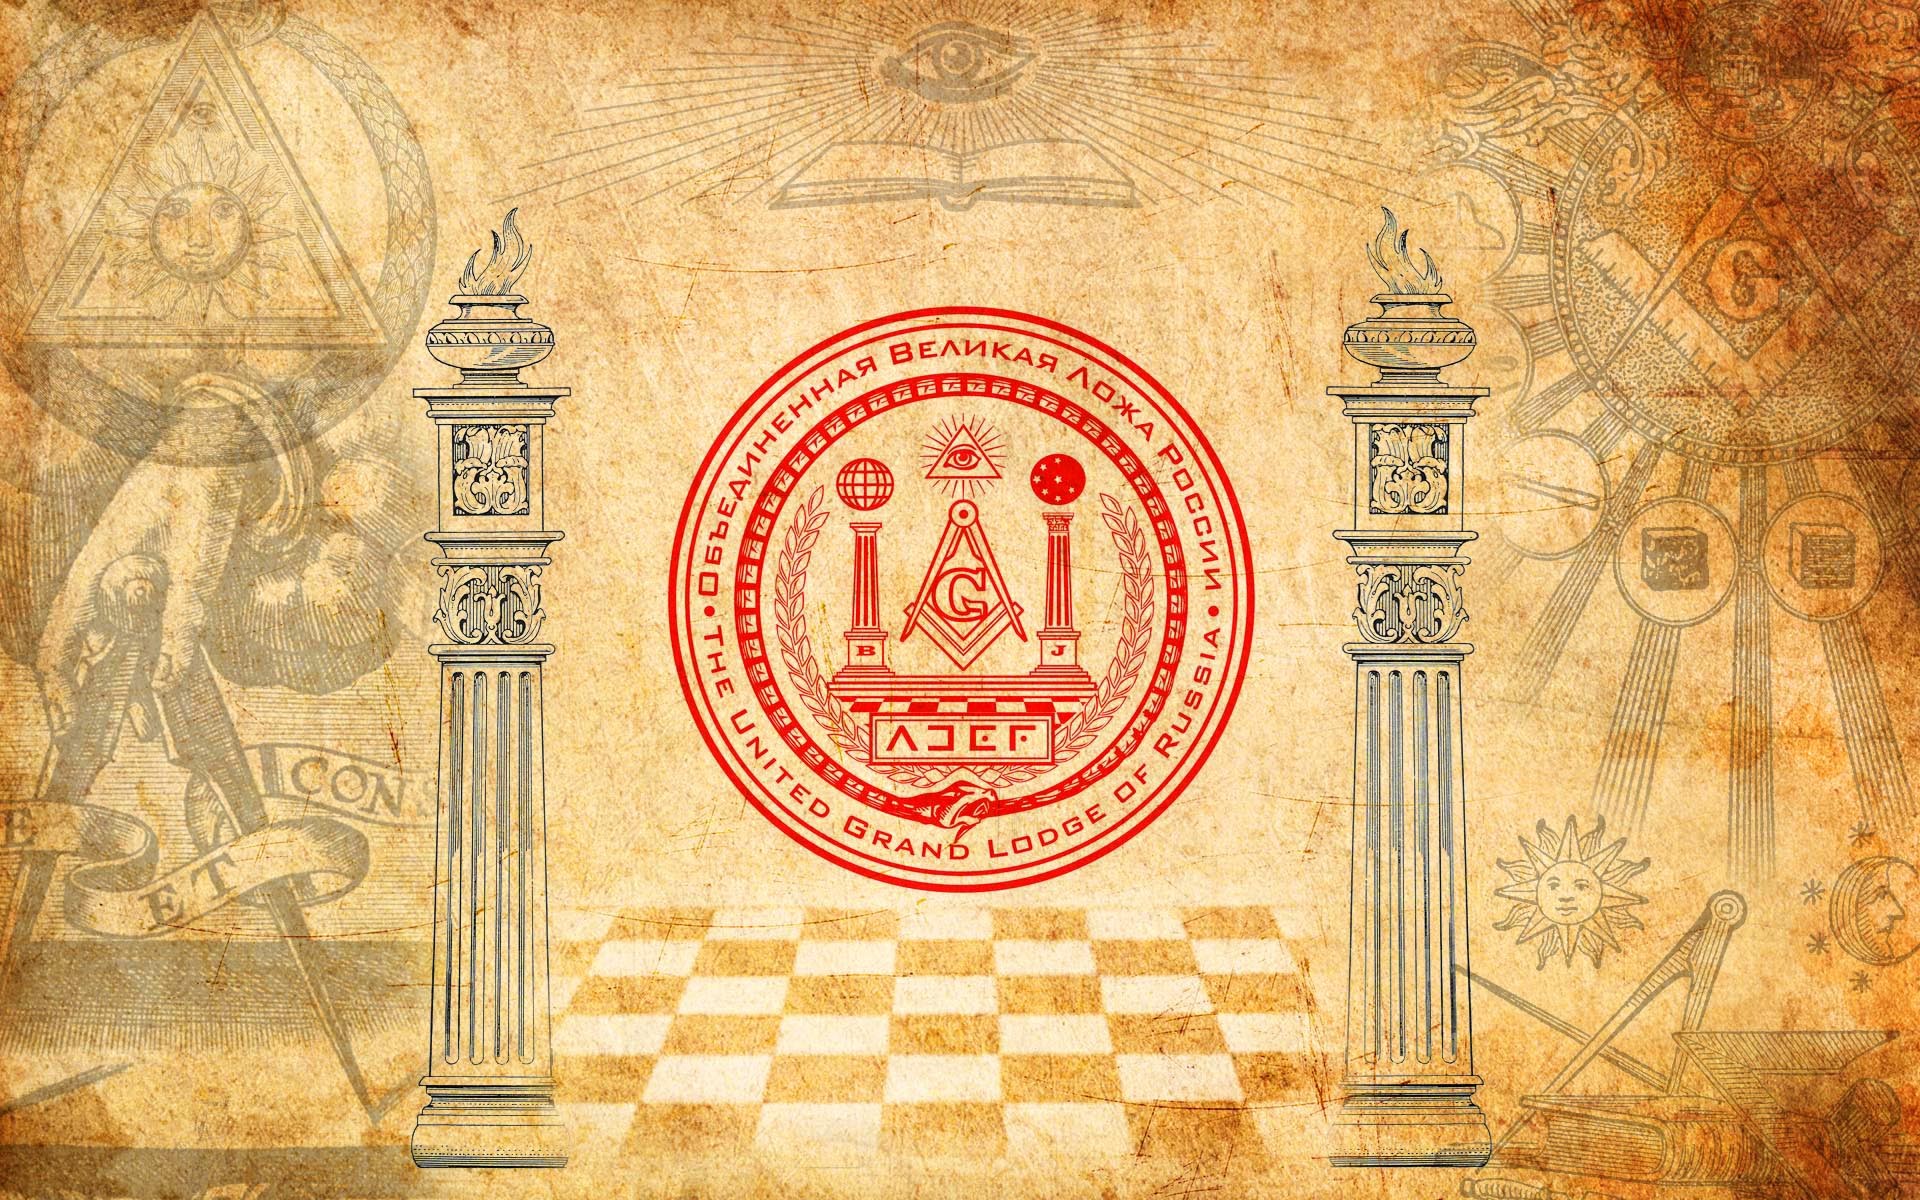 Lodge of Russia Wallpapers Grand Lodge of Russia Myspace Backgrounds 1920x1200